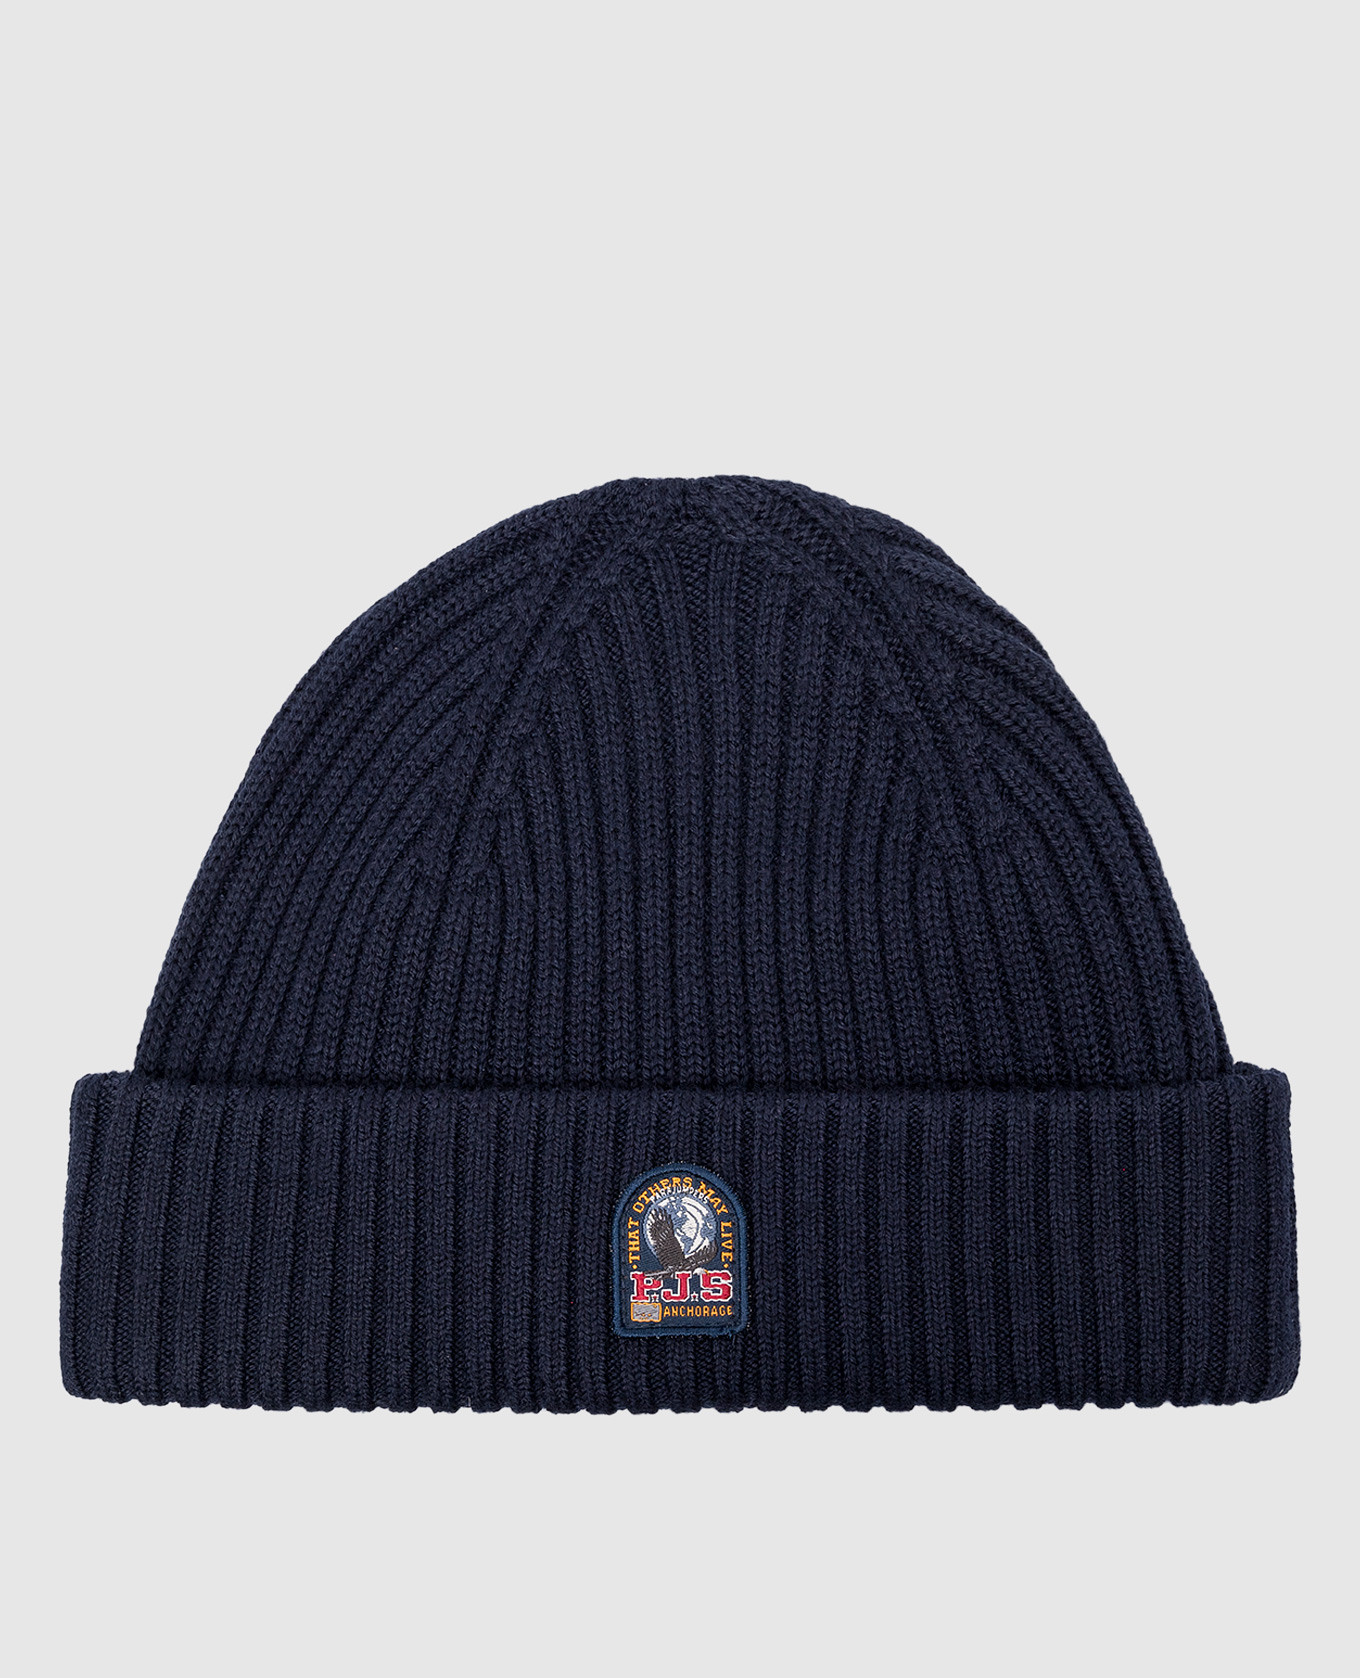 Blue Rib Hat with logo patch